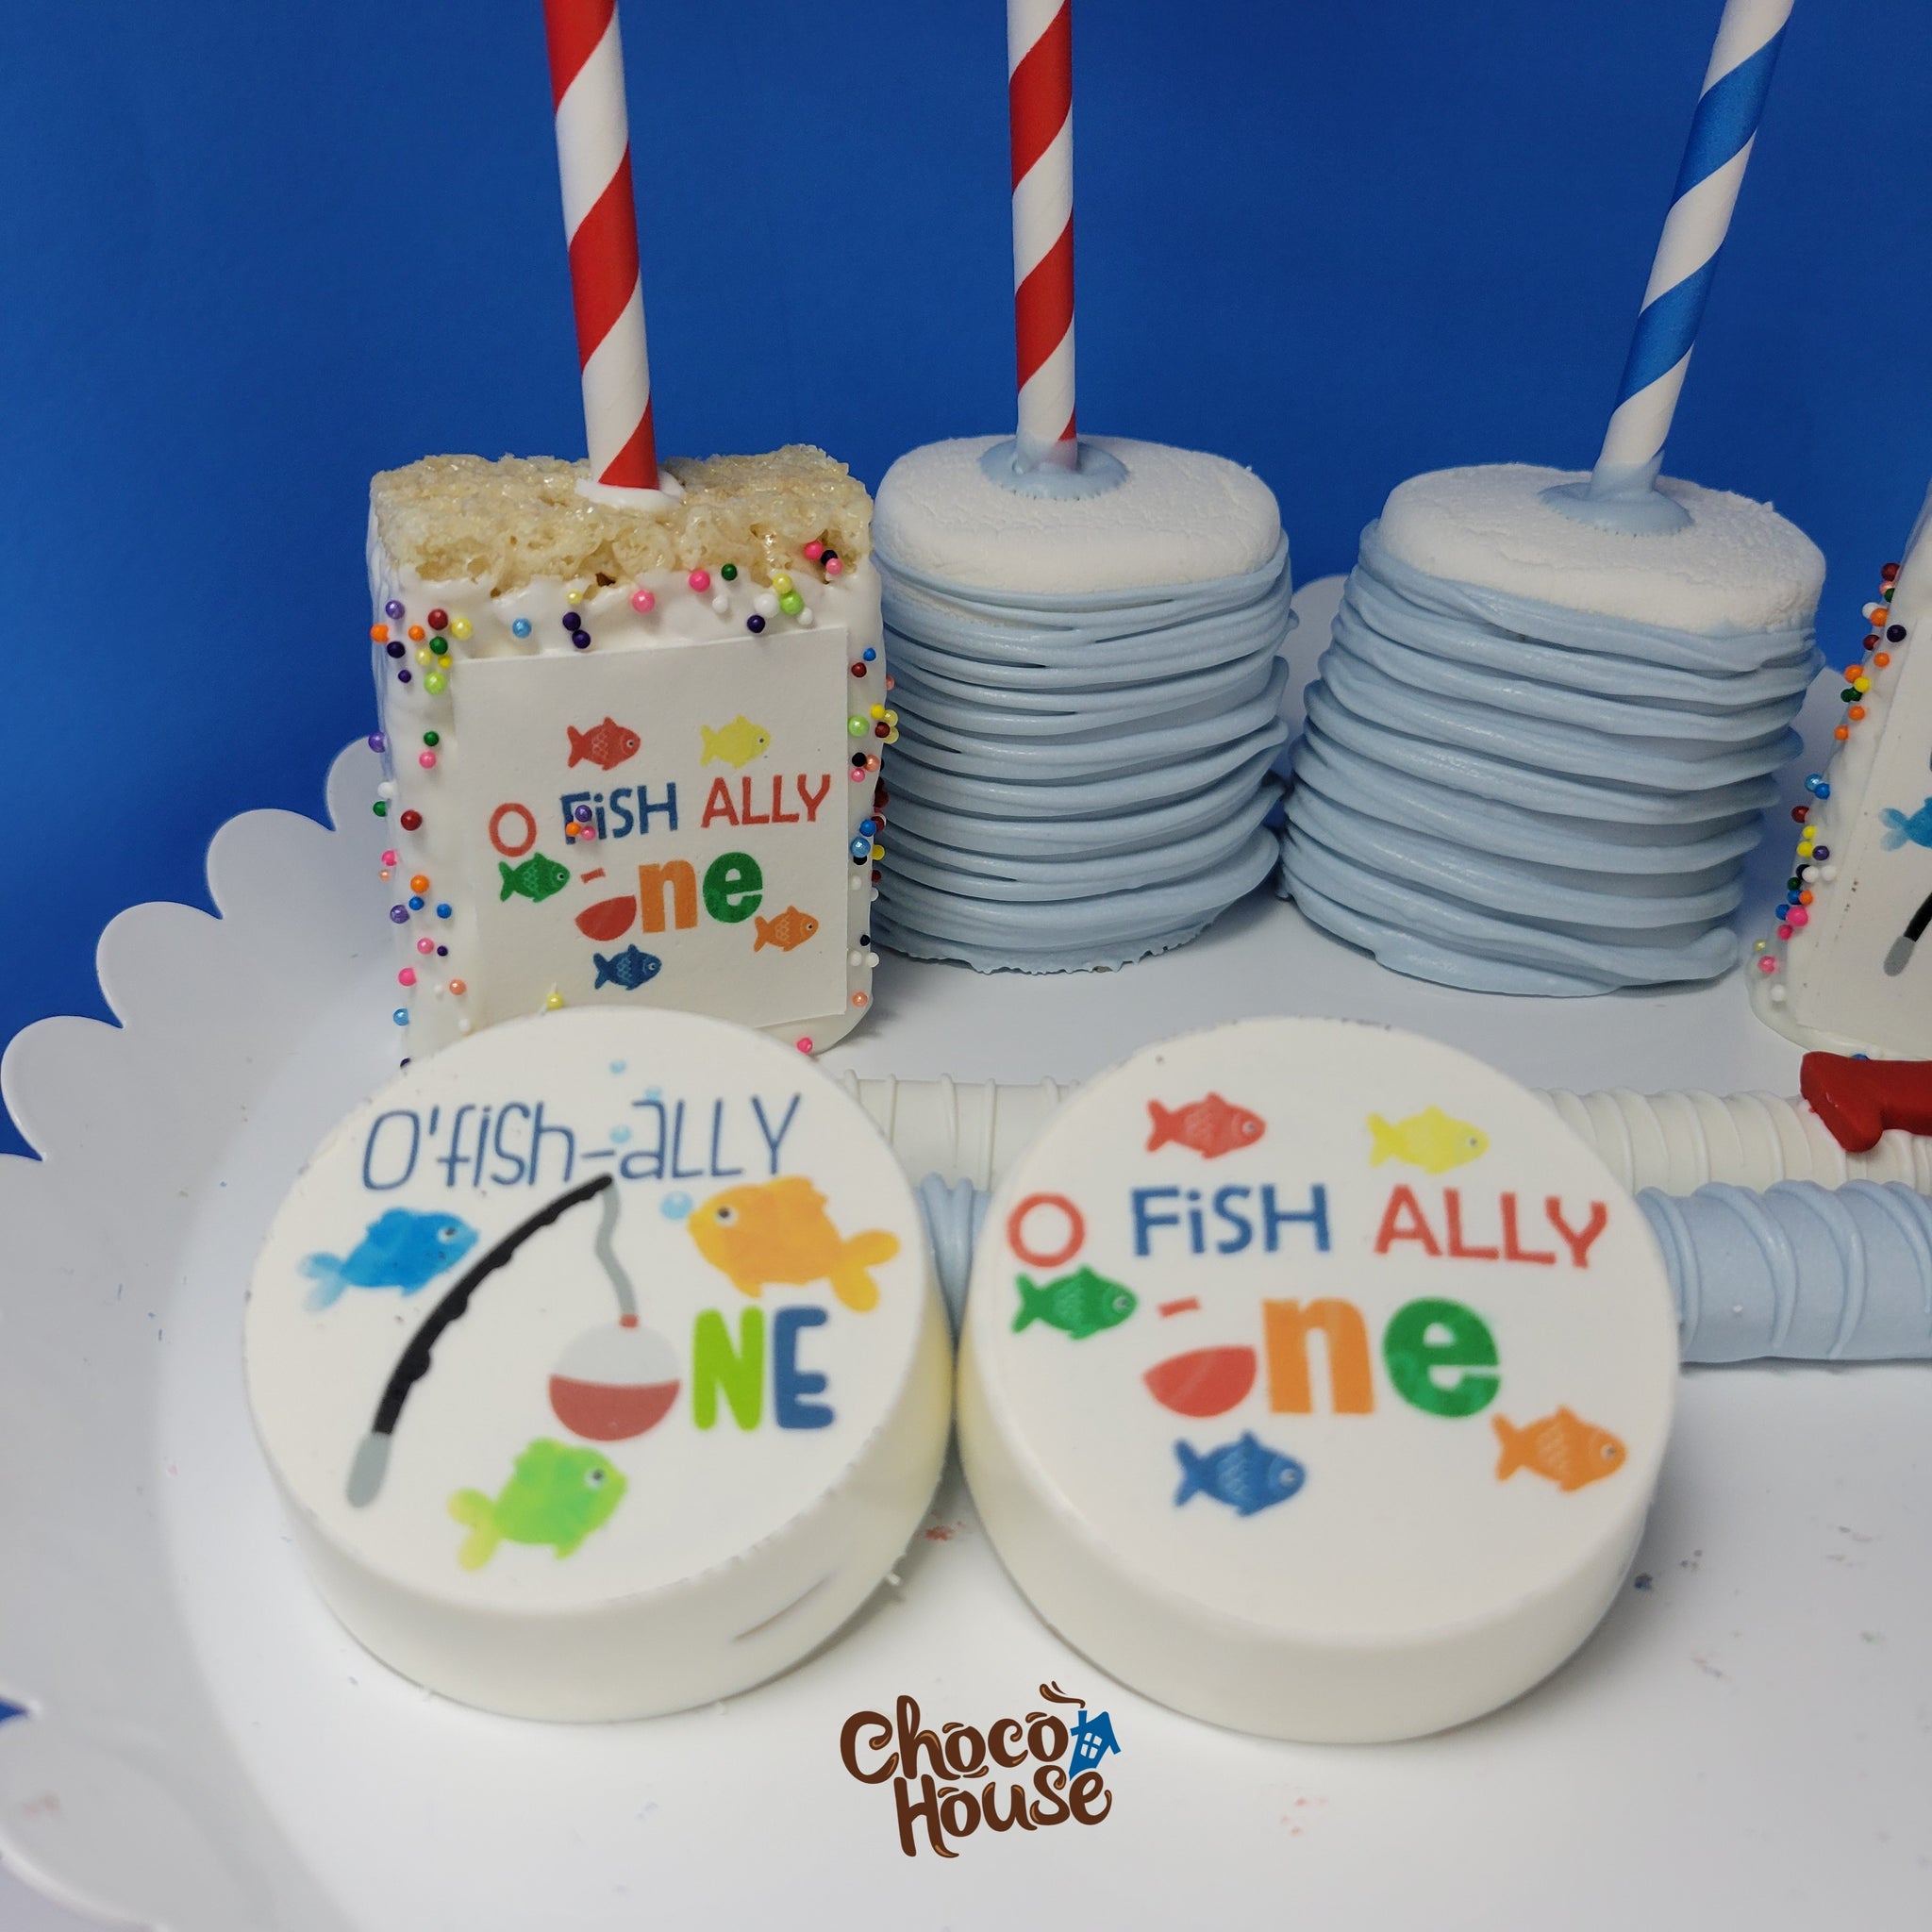 O Fish Ally ONE. First Birthday. 48 pieces – Choco House By Laura